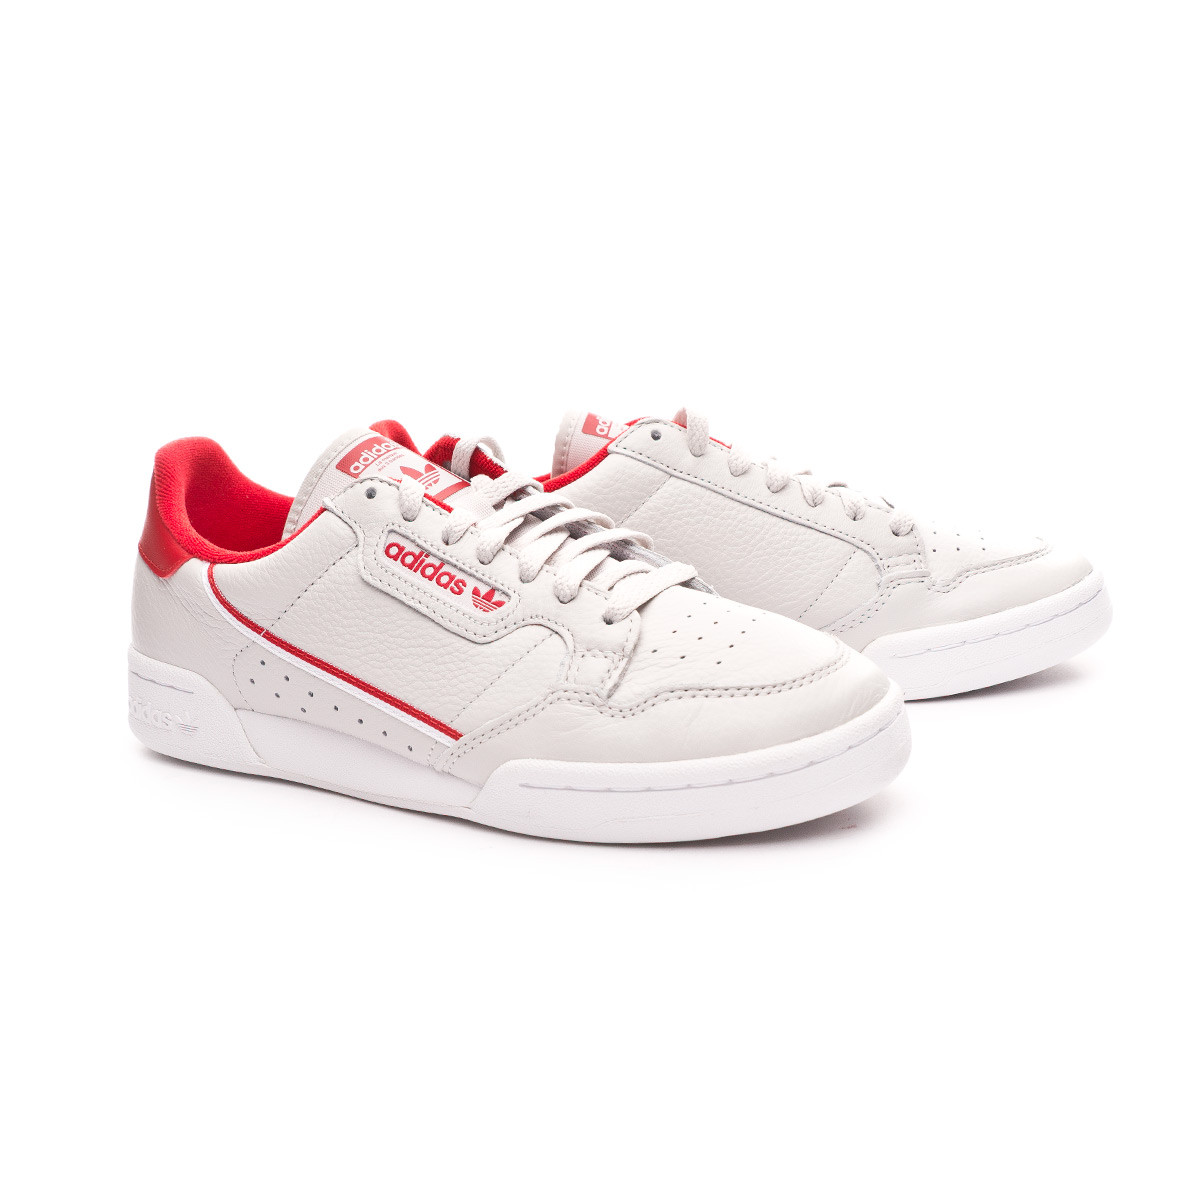 adidas continental 80 in store